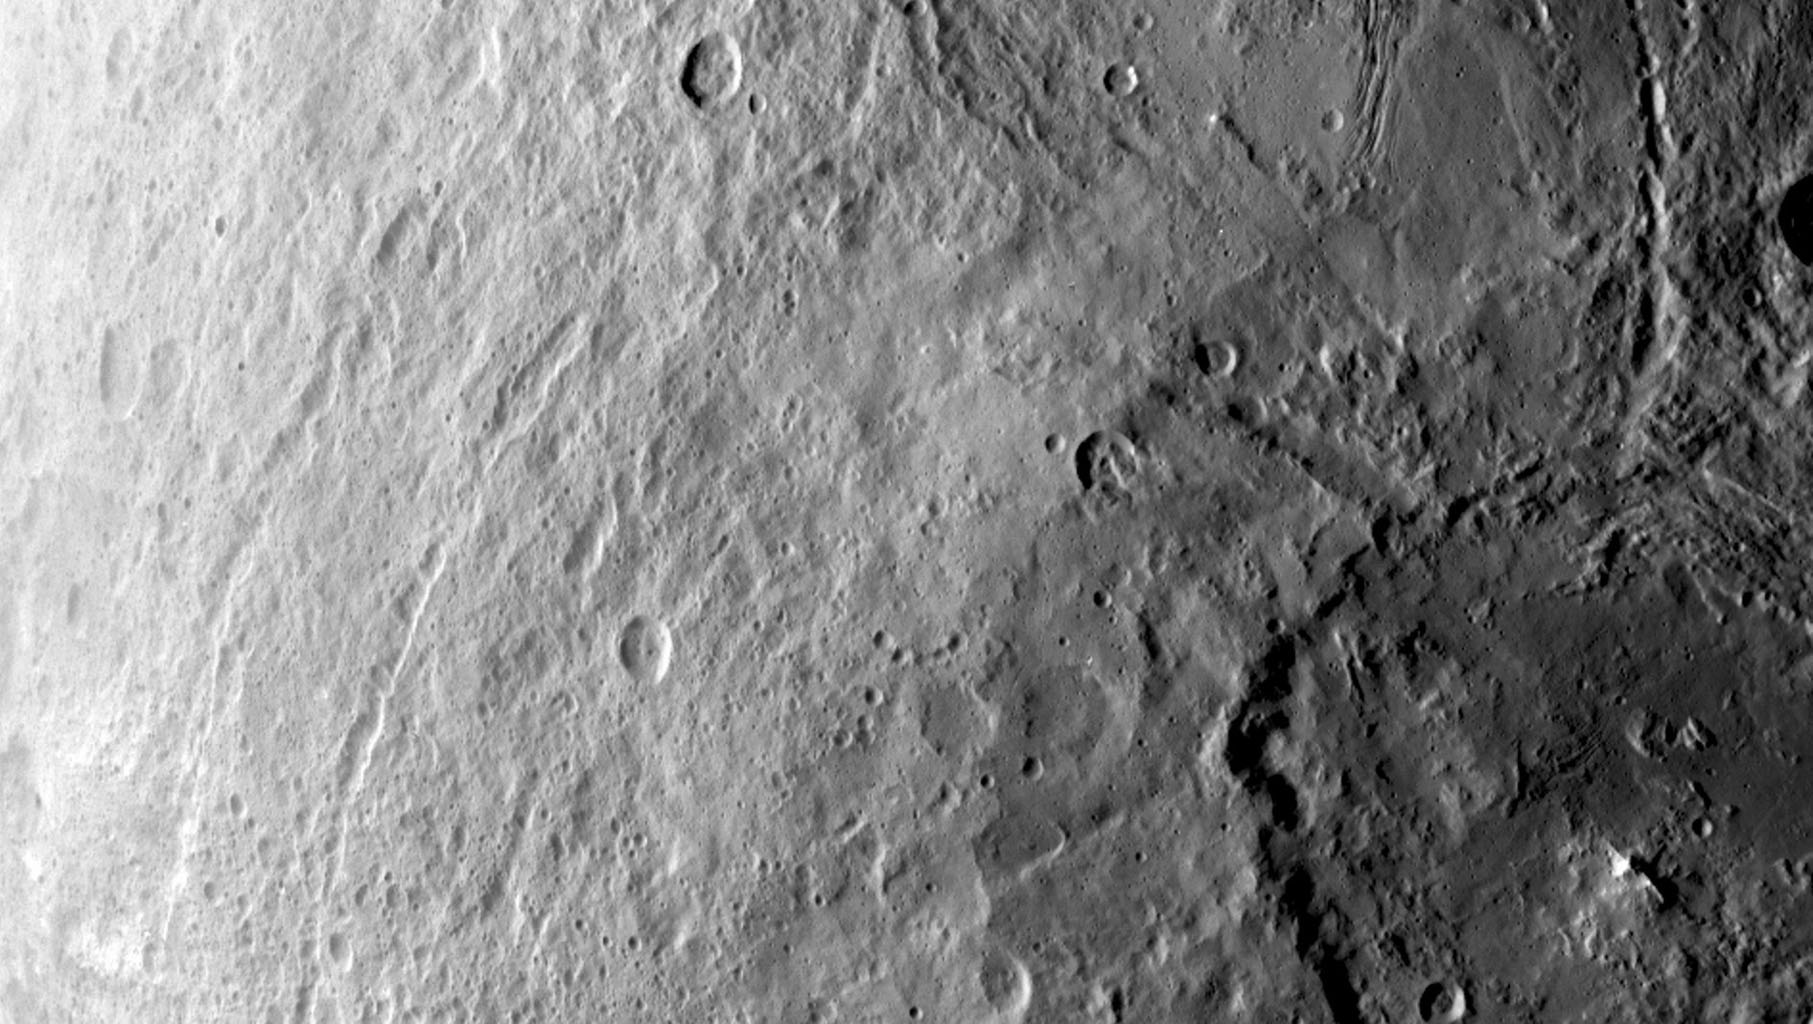 Ceres' Southern Hemisphere in Survey